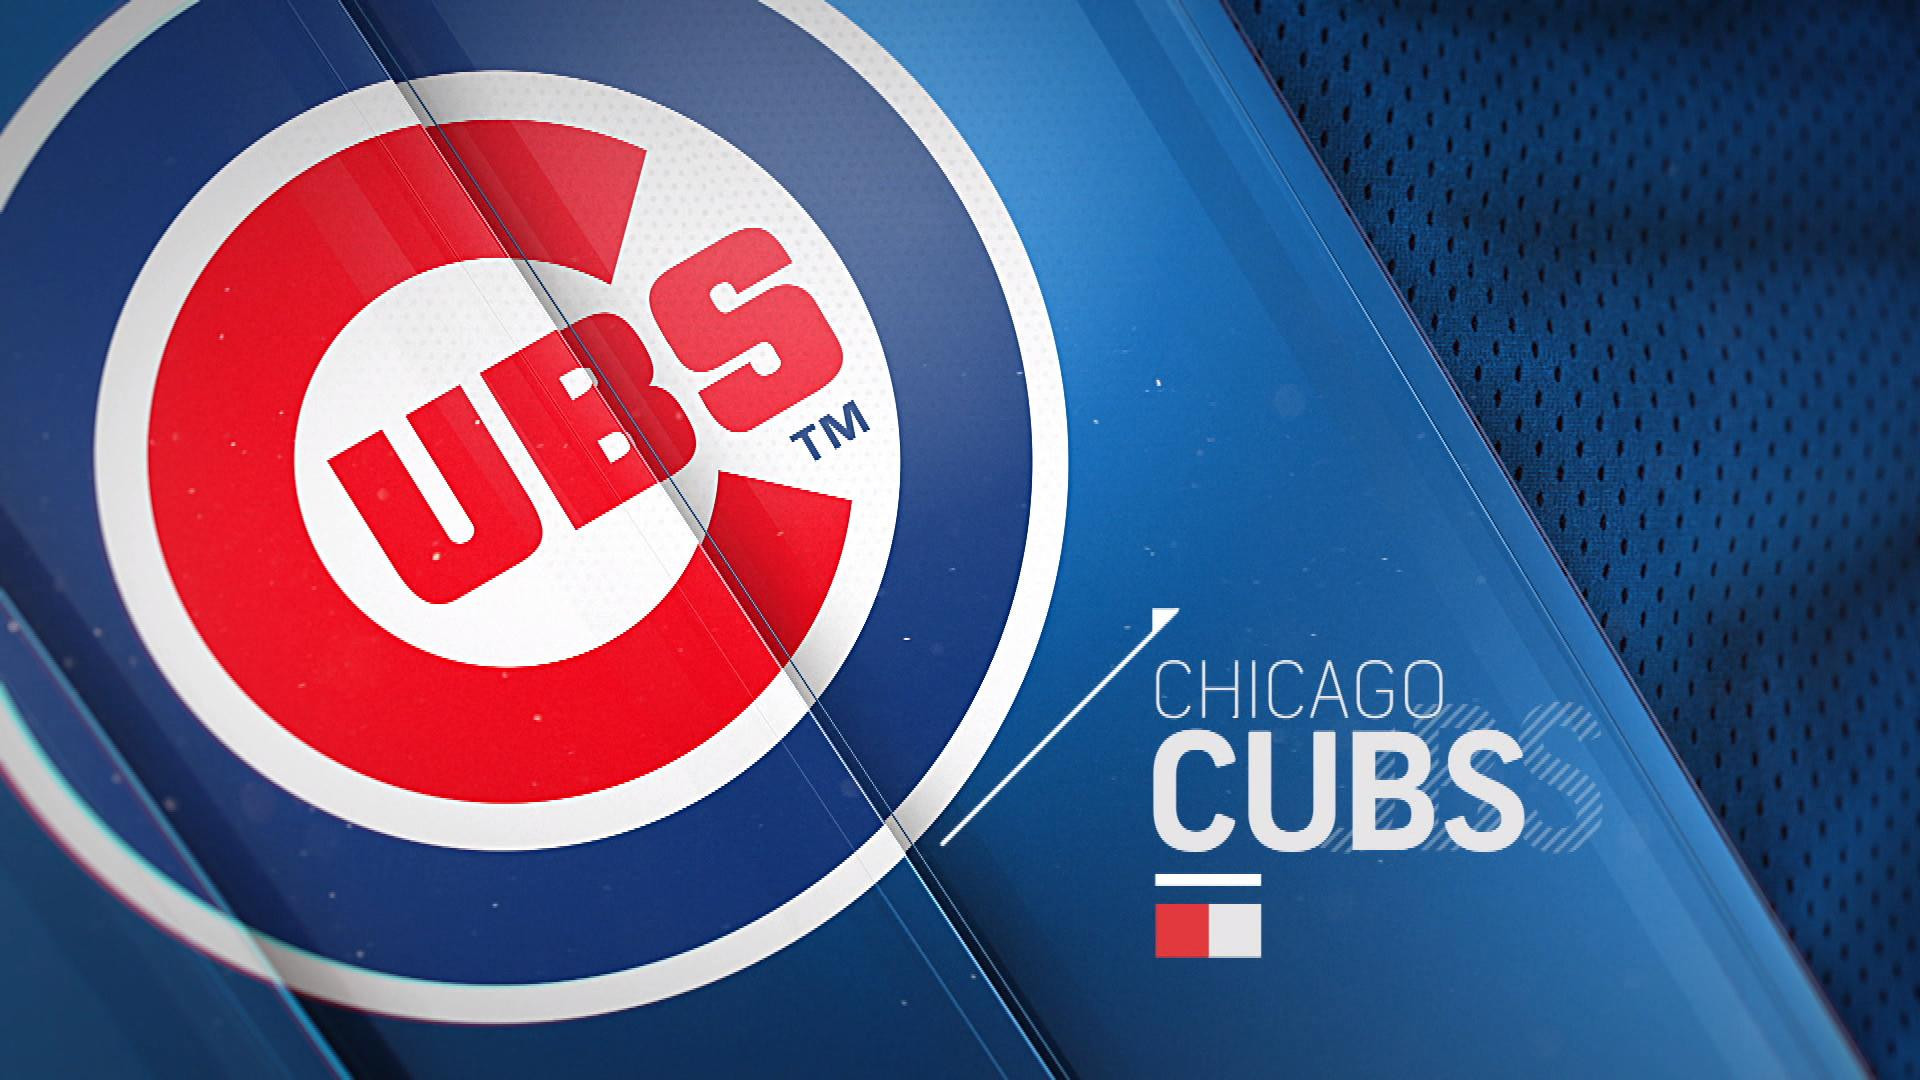 1920x1080 Chicago Cubs Wallpaper Awesome Chicago Cubs Wallpapers Sports Hq Chicago  Cubs Pictures